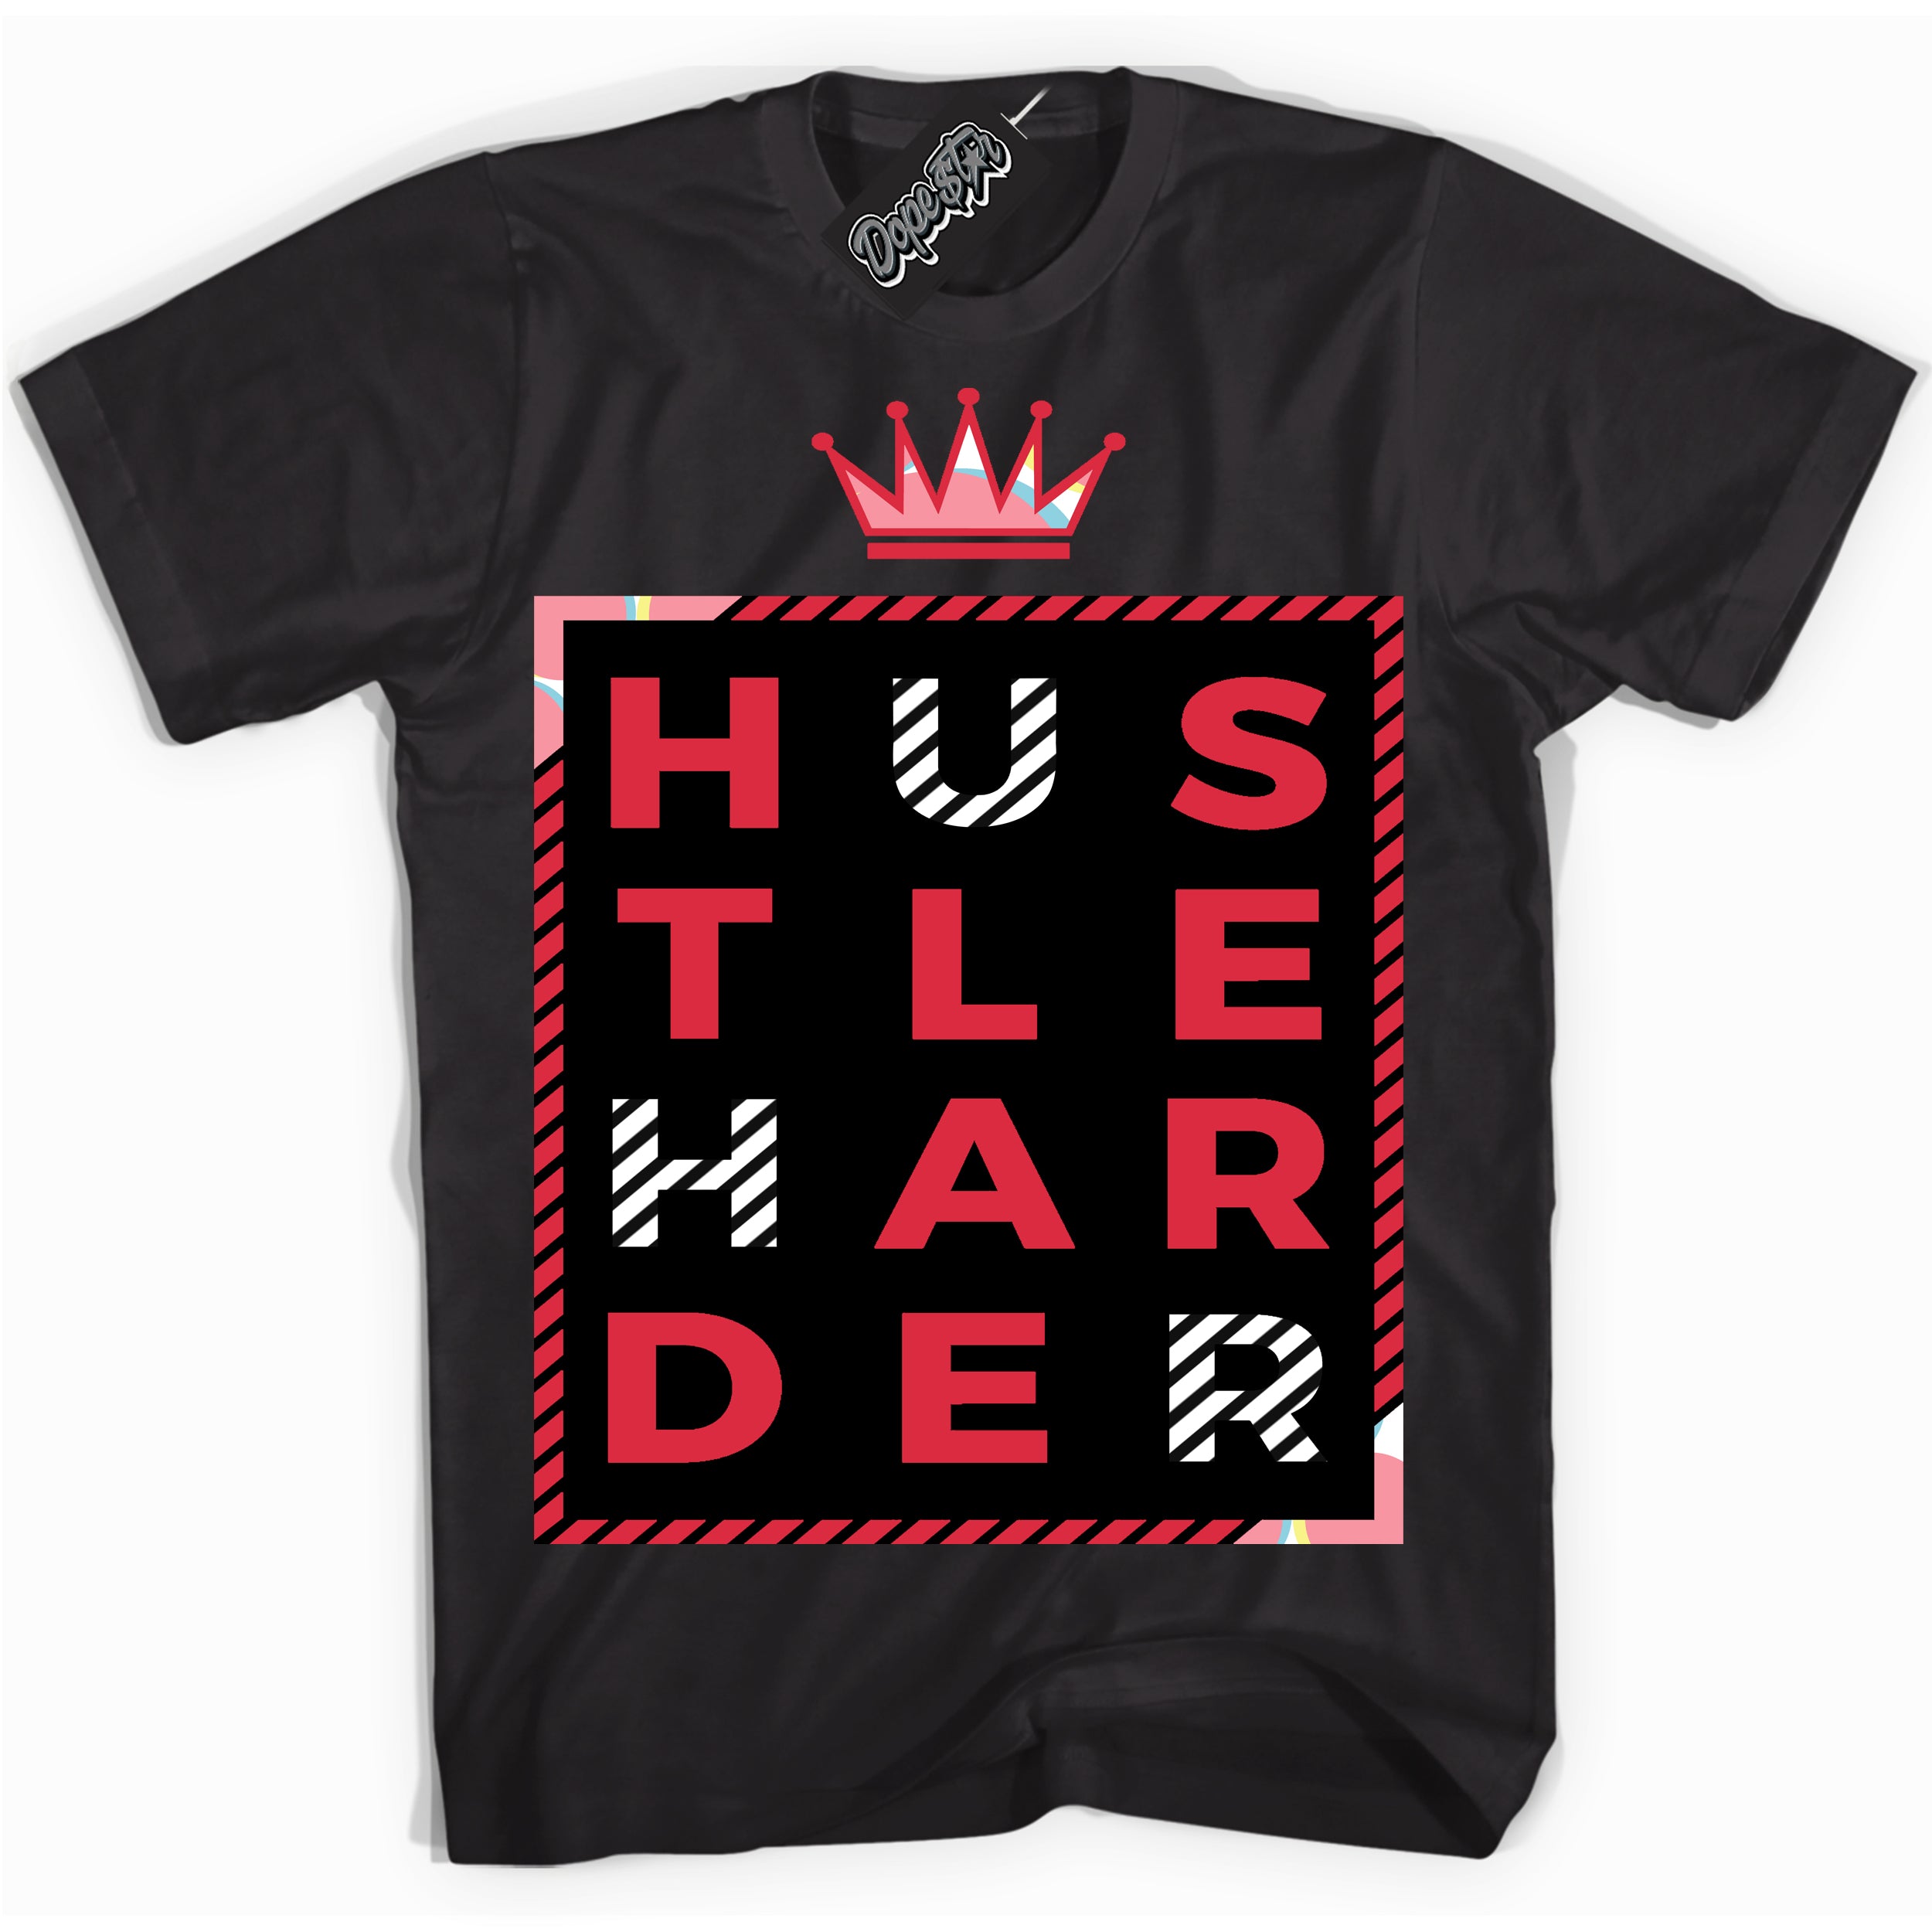 Cool Black graphic tee with “ Hustle Harder ” design, that perfectly matches Spider-Verse 1s sneakers 